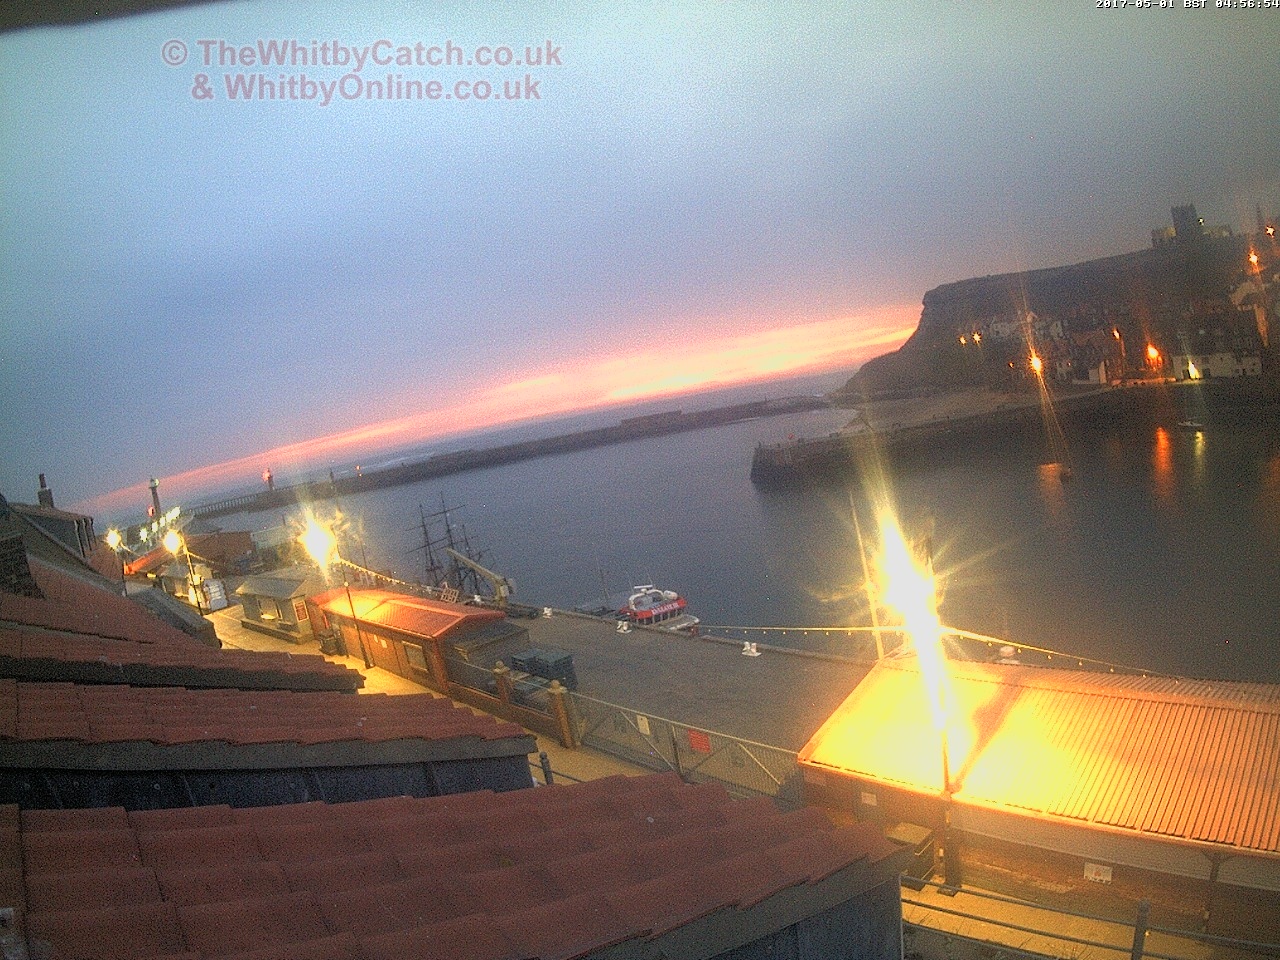 Whitby Mon 1st May 2017 04:57.